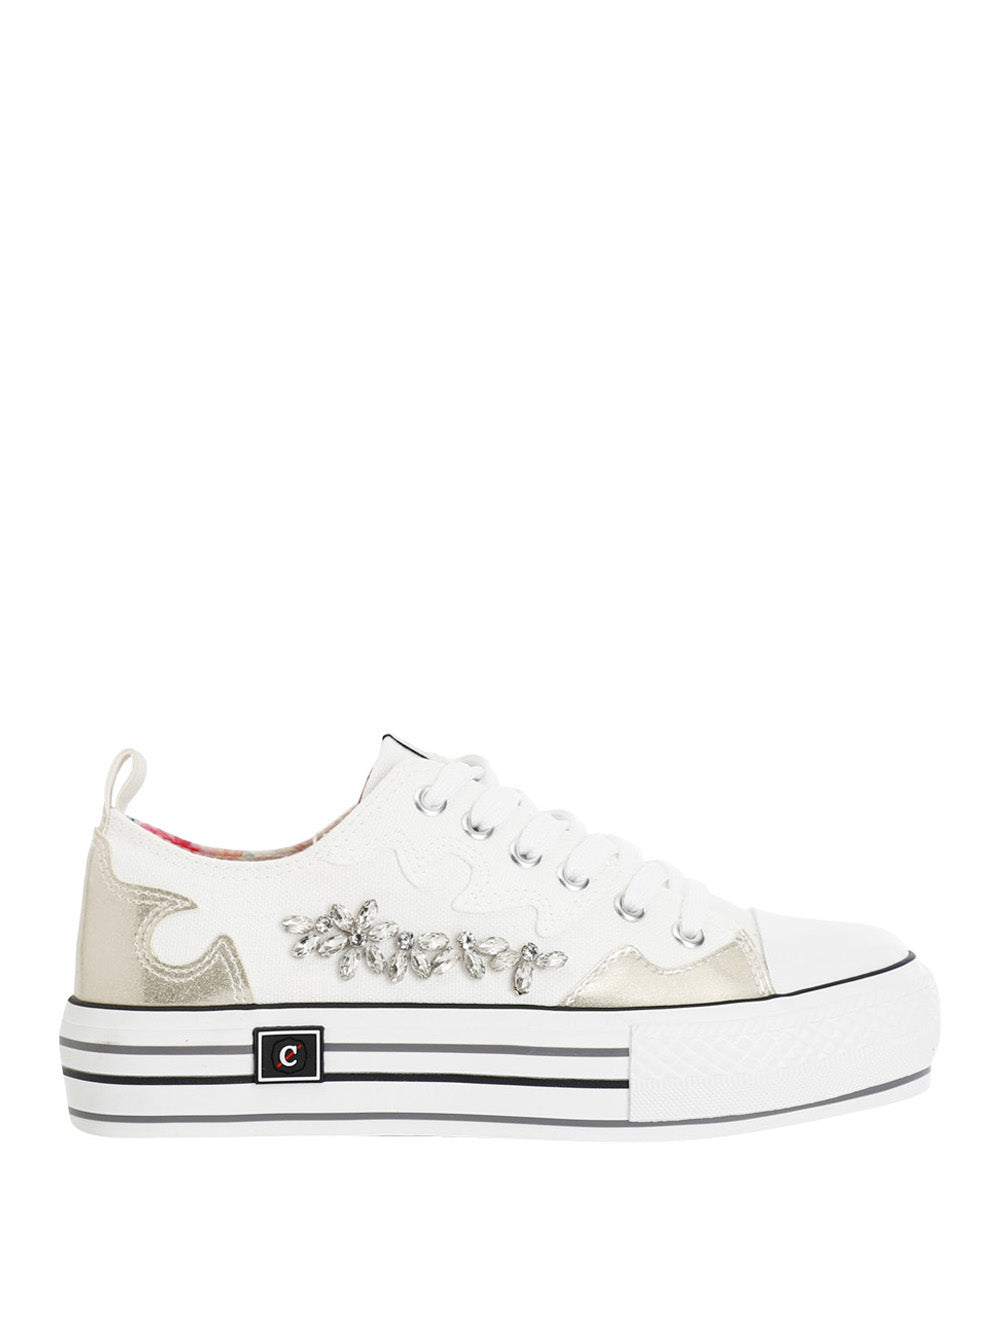 CAFE'NOIR Sneakers Donna - Bianco